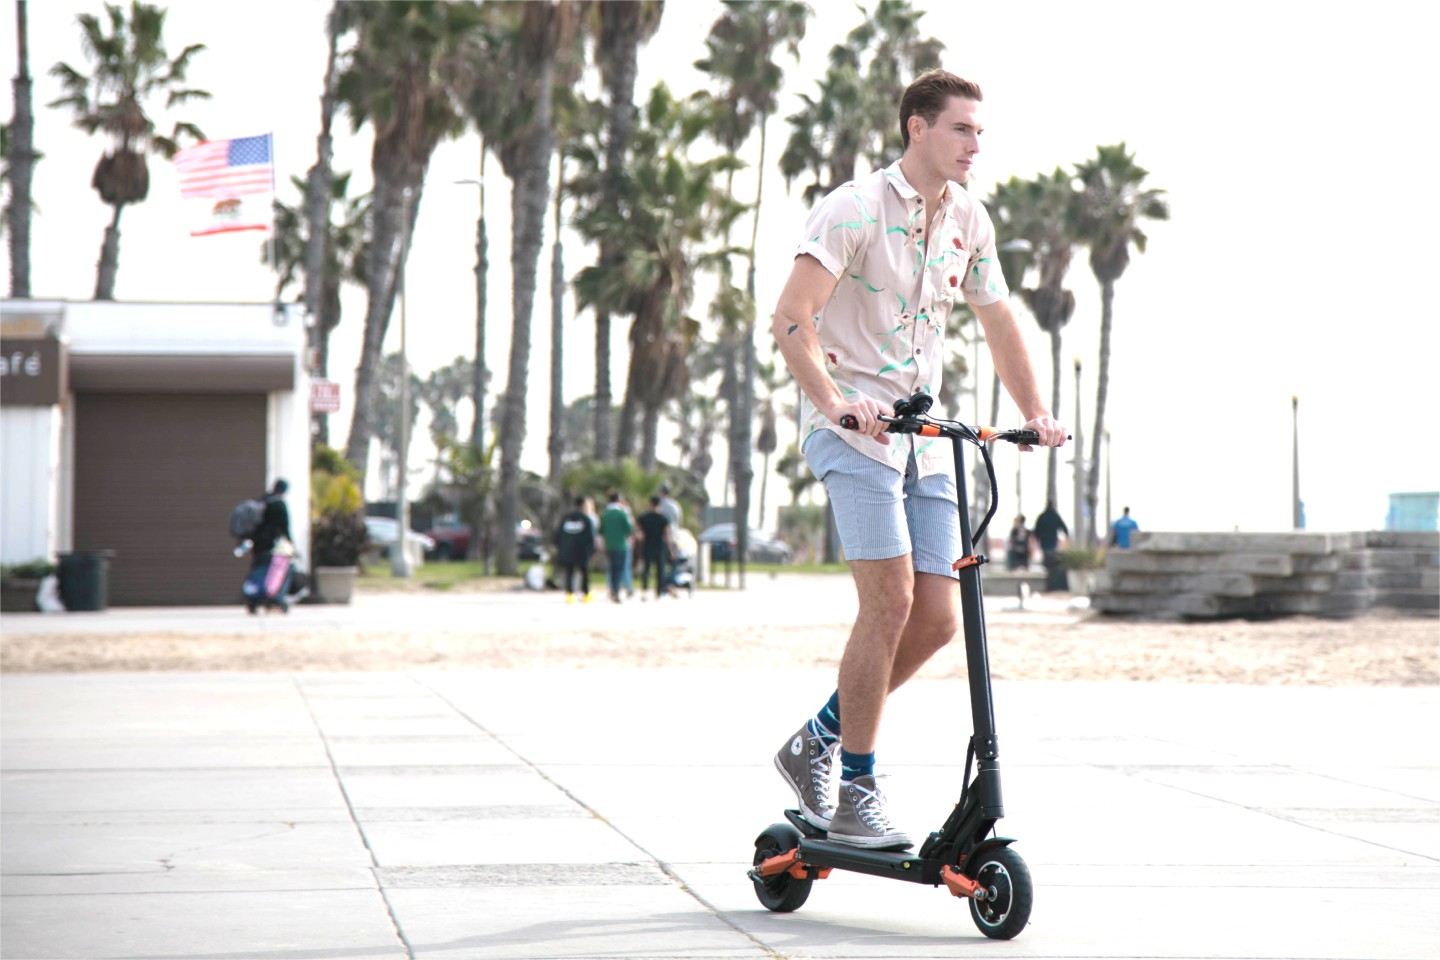 The Splach e-scooter is presently on Indiegogo